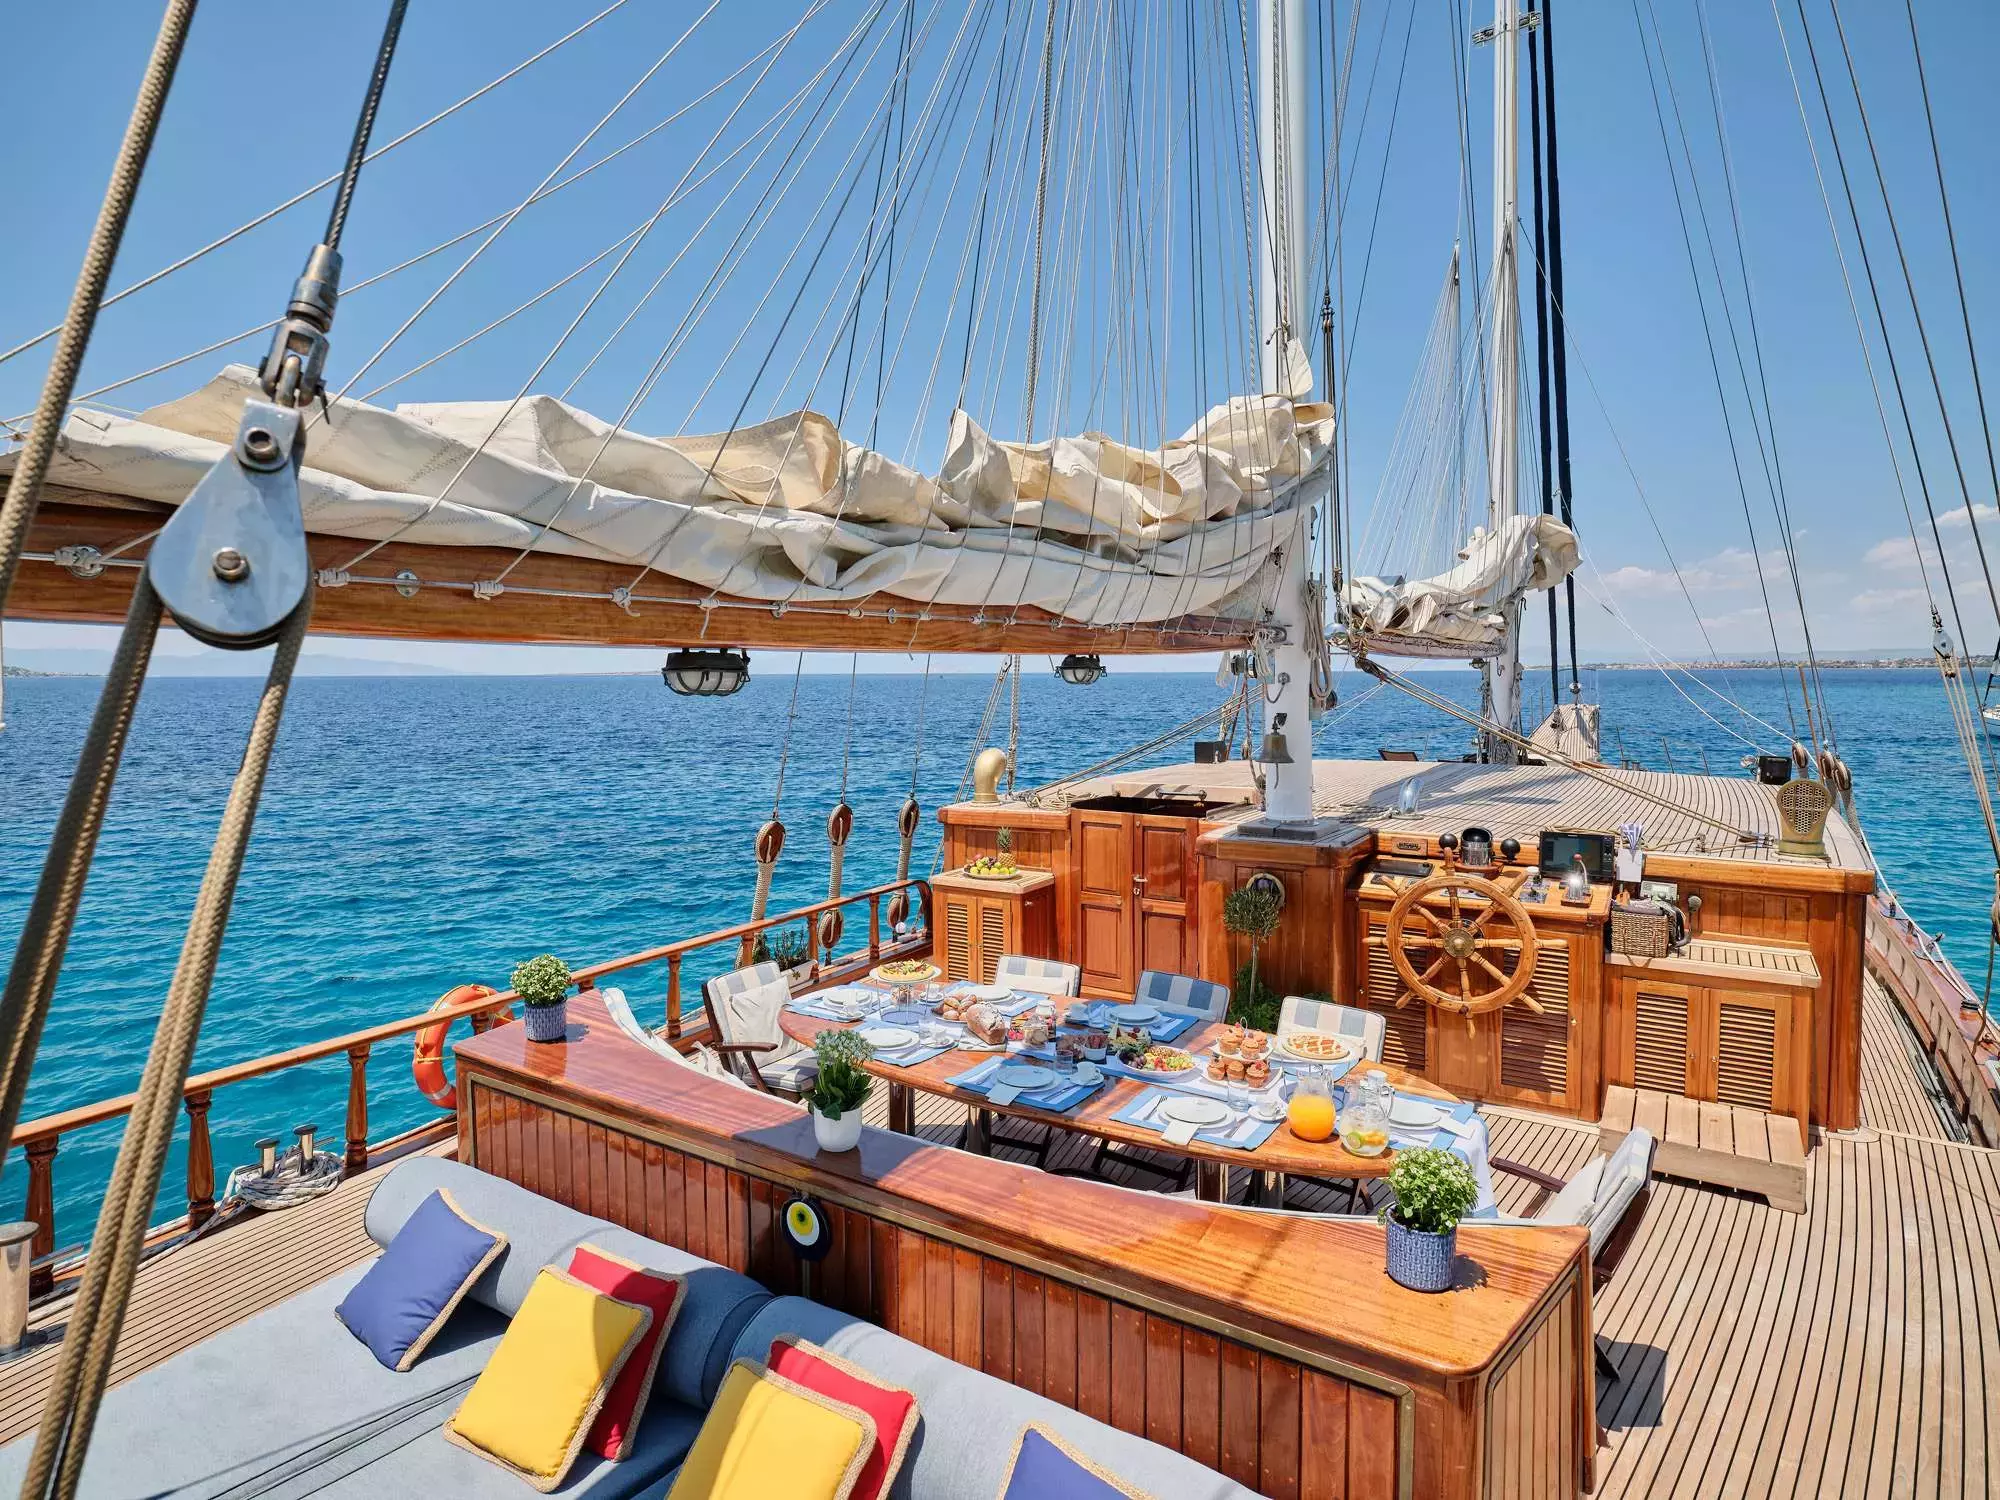 Myra by Ege Yat - Top rates for a Rental of a private Motor Sailer in Italy